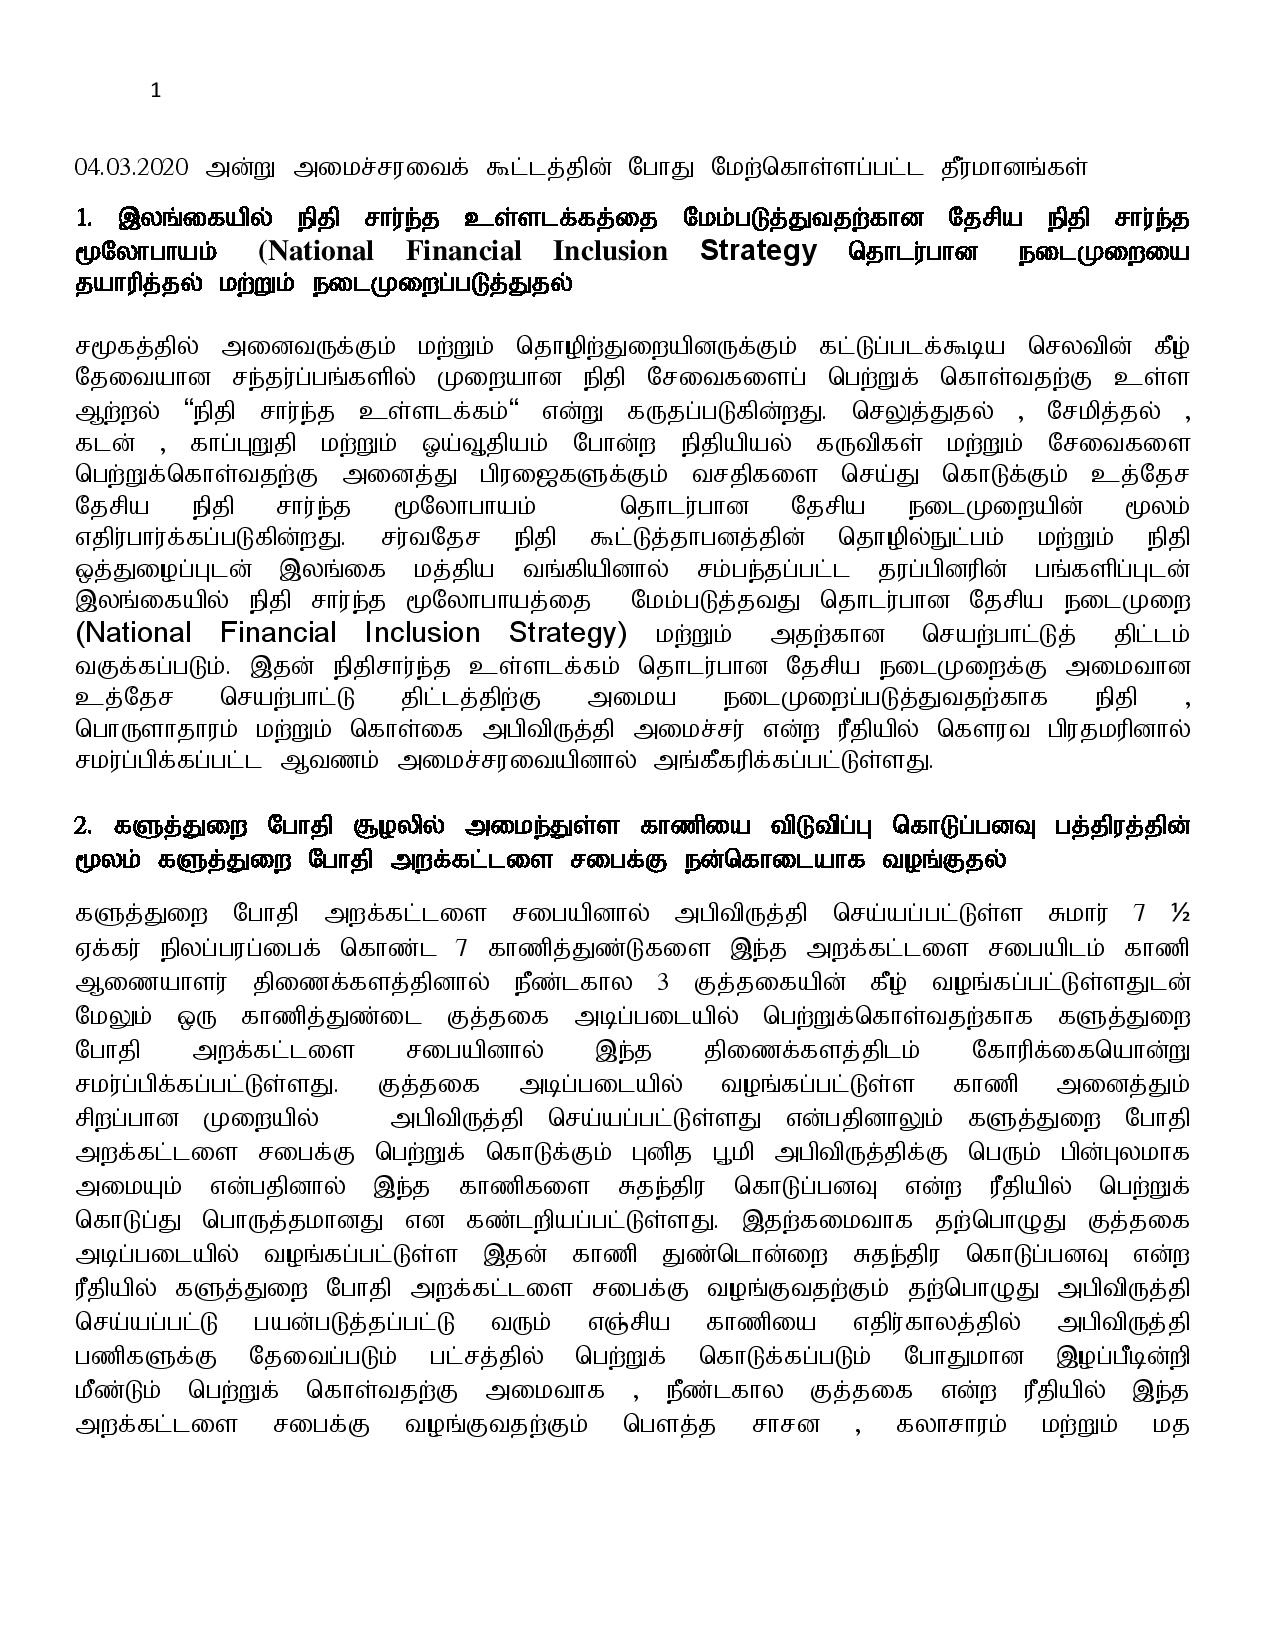 04.03.2020 cabinet Tamil page 001